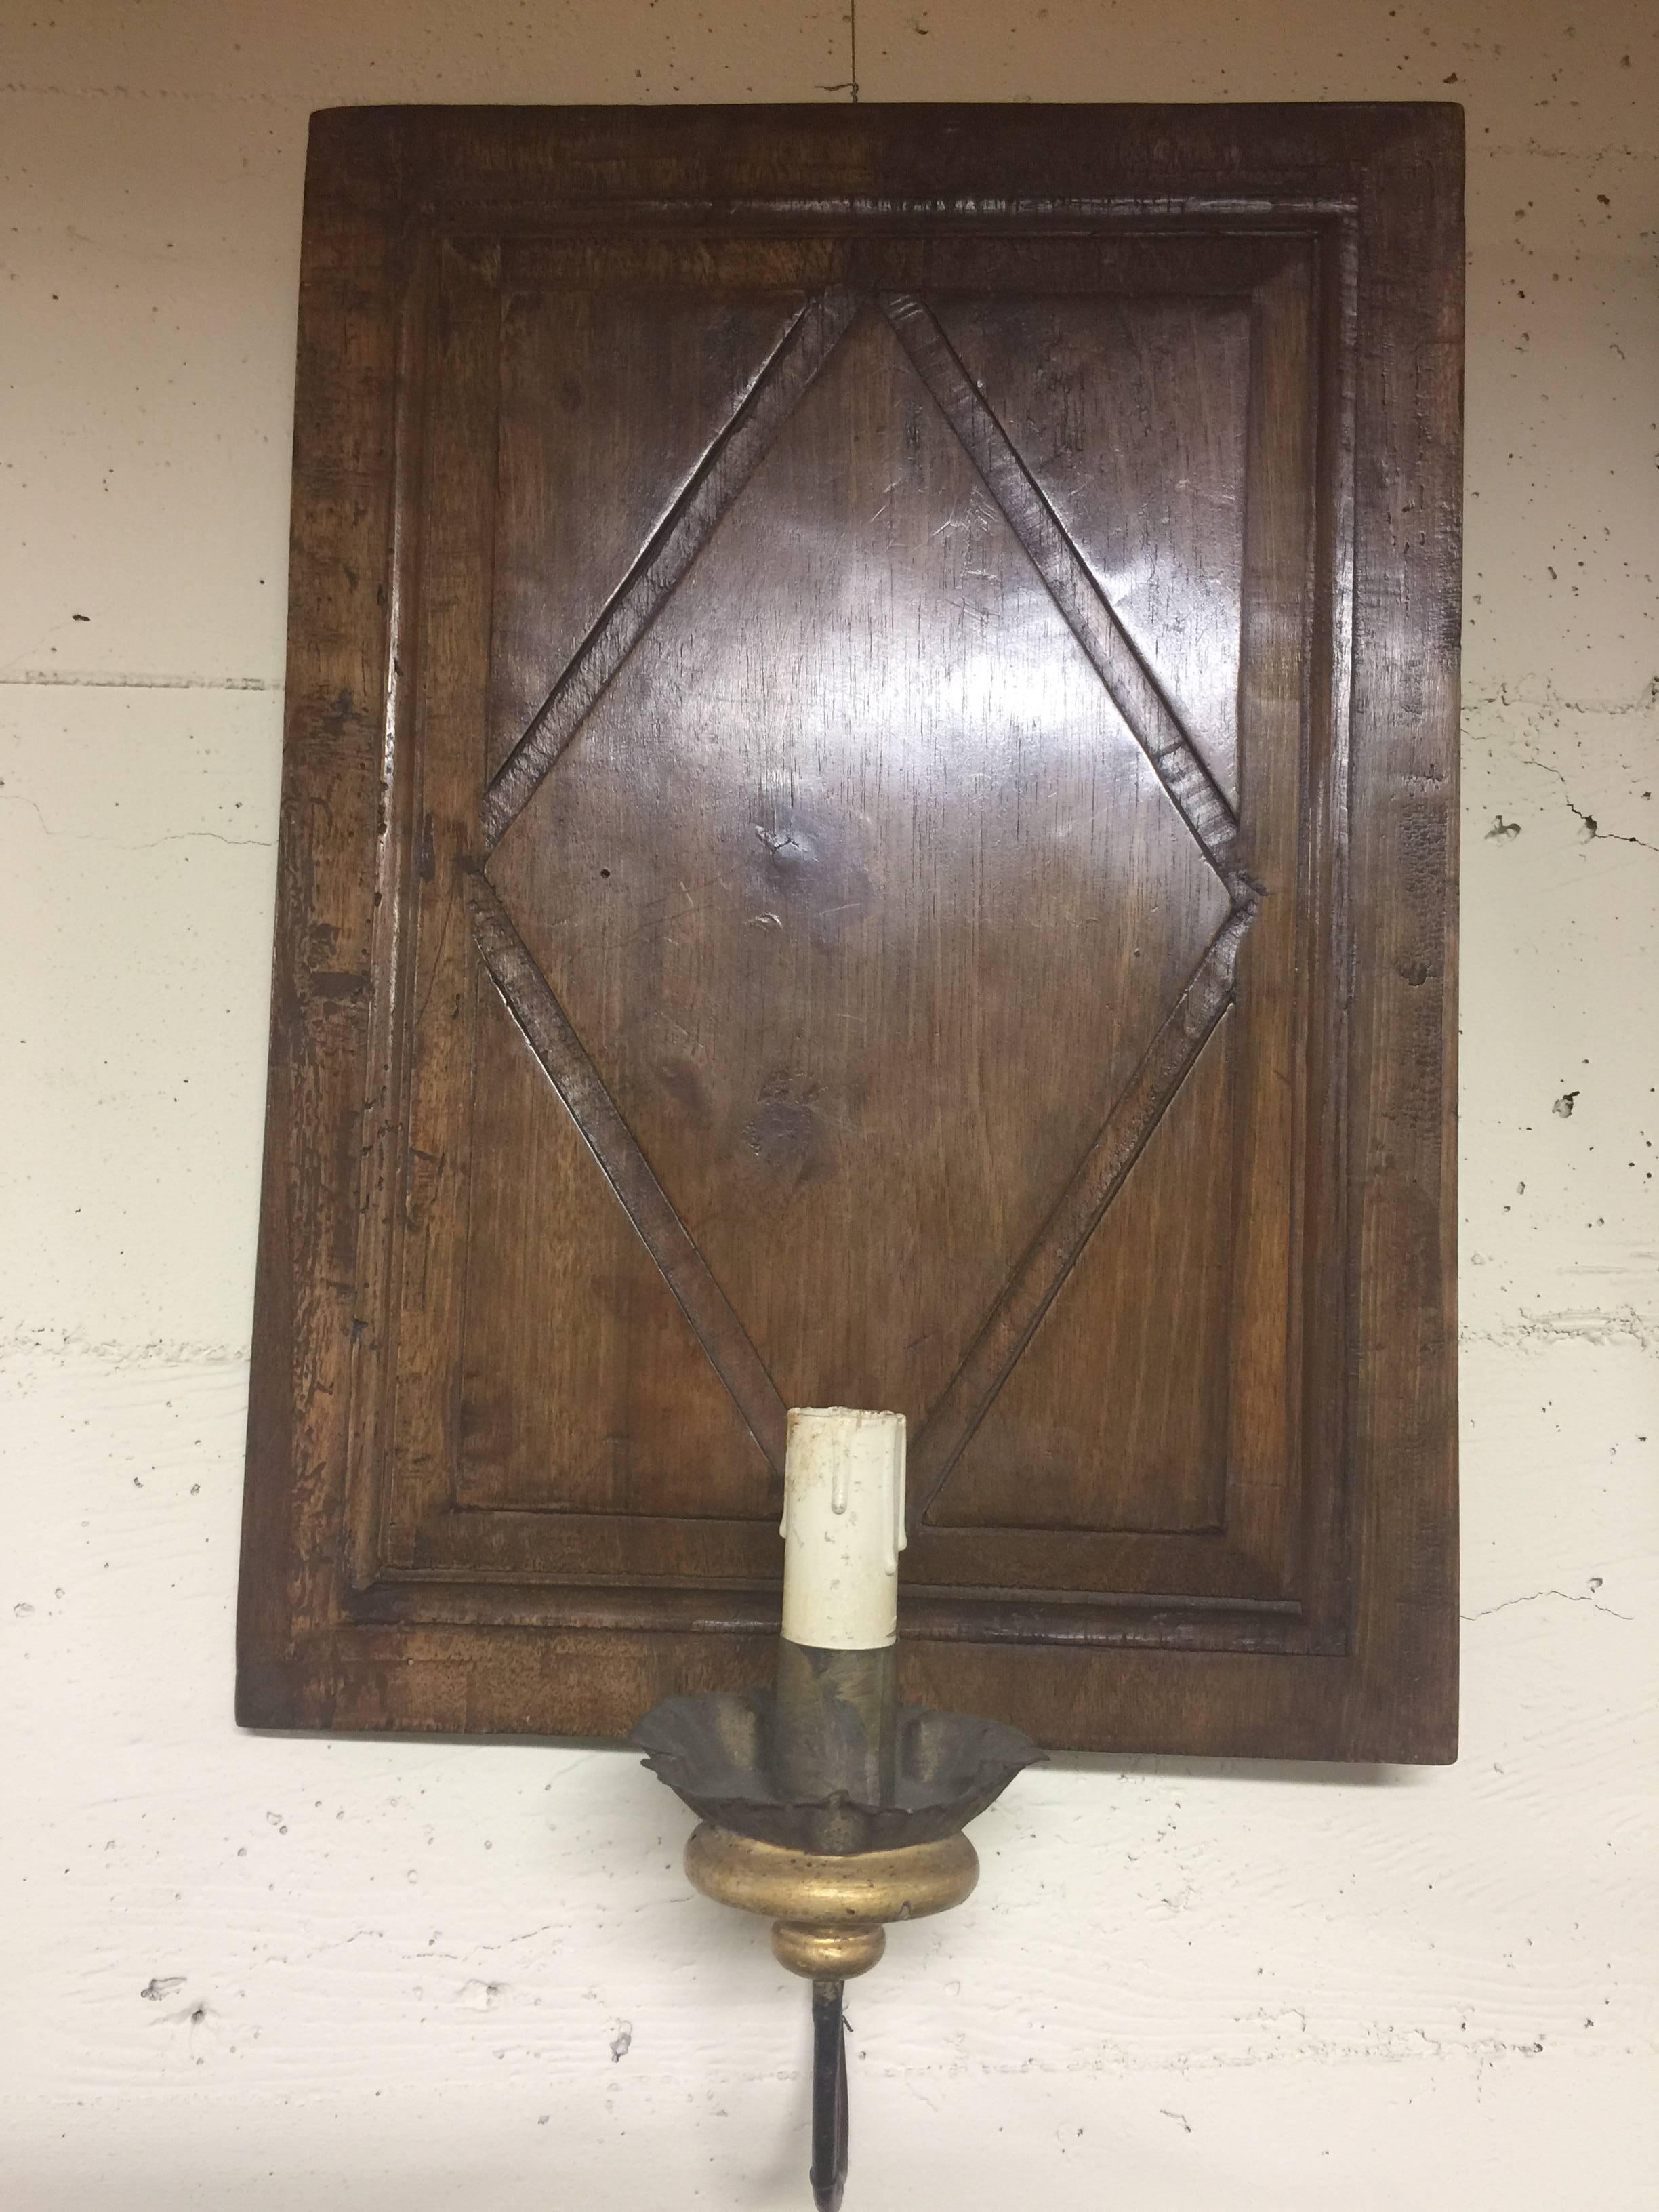 19th century wood panel made into sconce rewired American with wax candle sleeve. Measures: 17.5